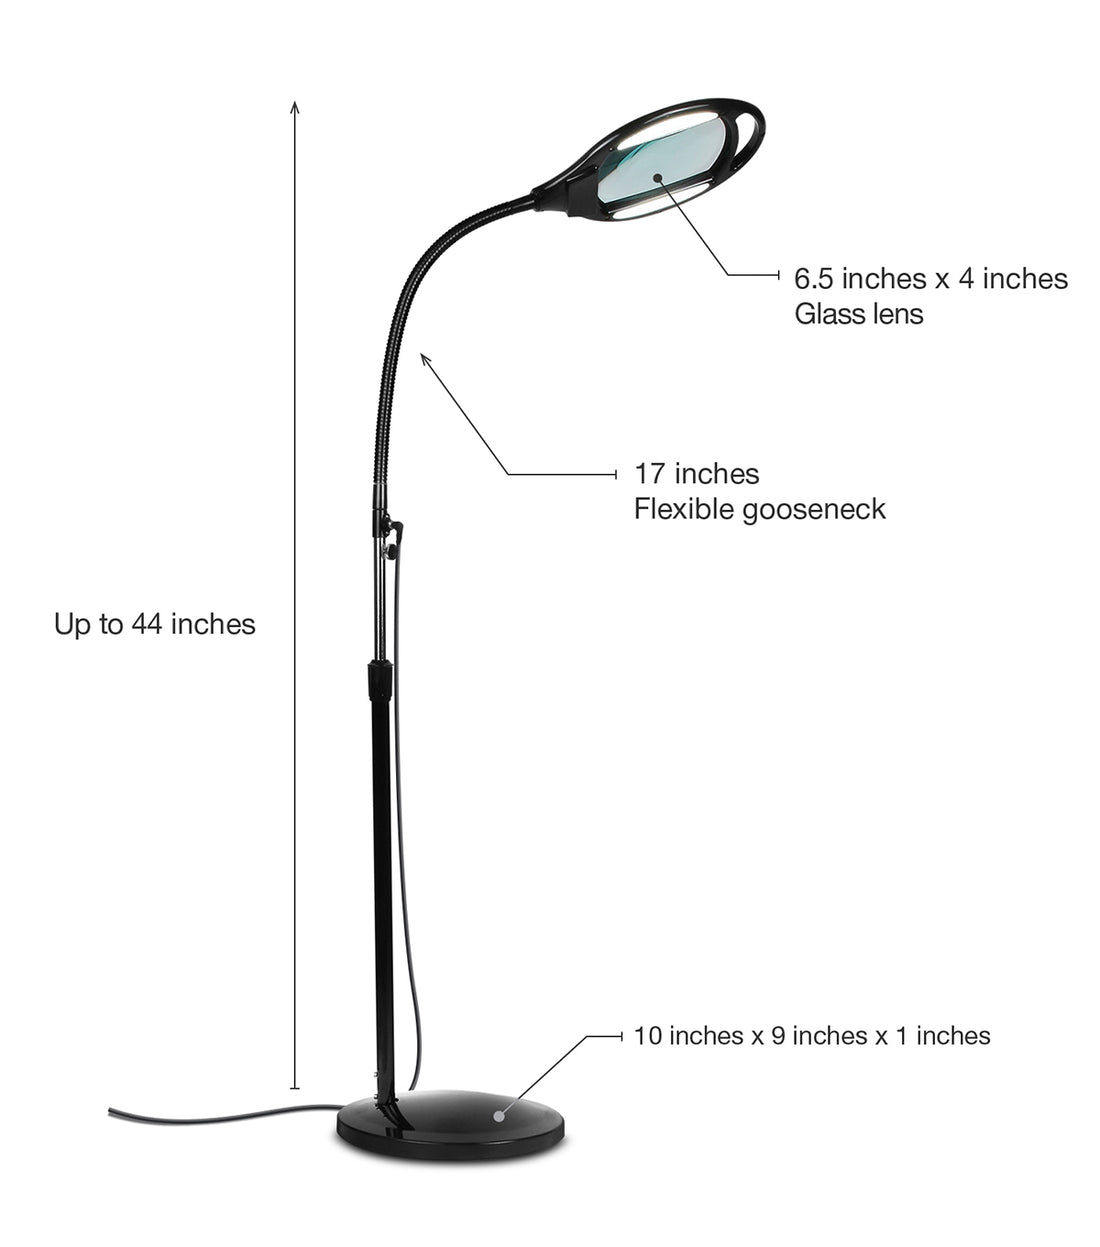 Brightech LightView Pro - Full Page Magnifying Floor Lamp - Hands Free  Magnifier with Bright LED Light for Reading - Flexible Gooseneck Holds  Position